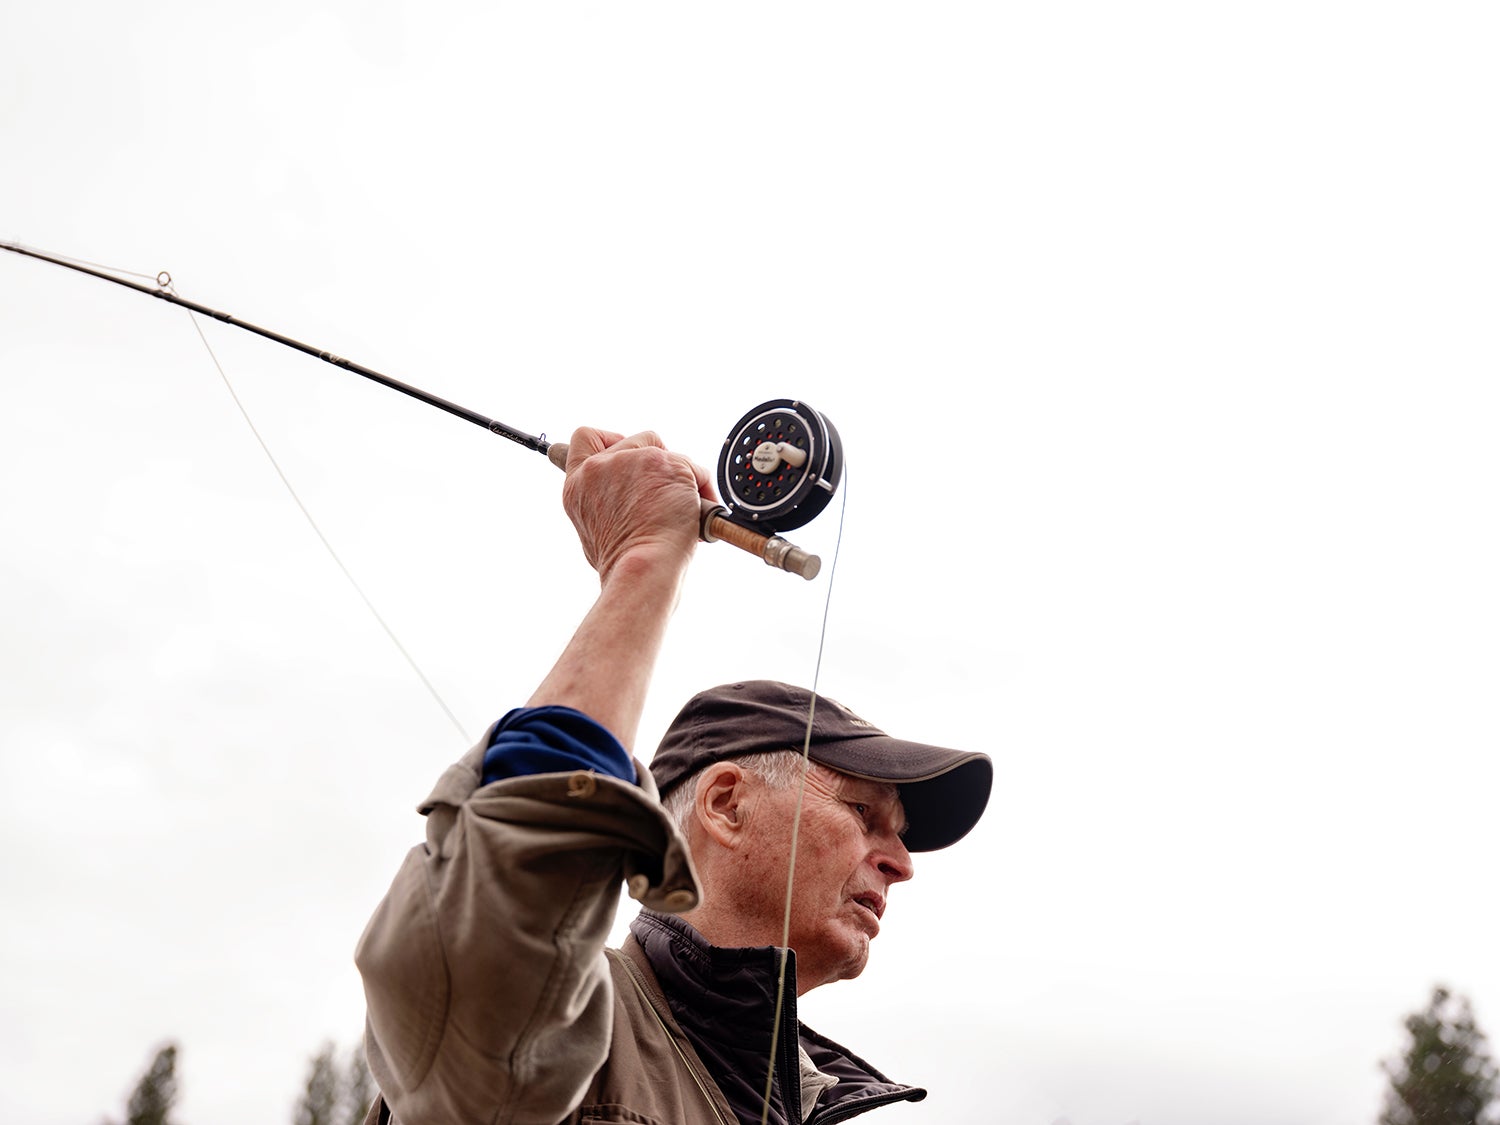 A man wearing a brown hat and vest casts a fly fishing rod in Montana.